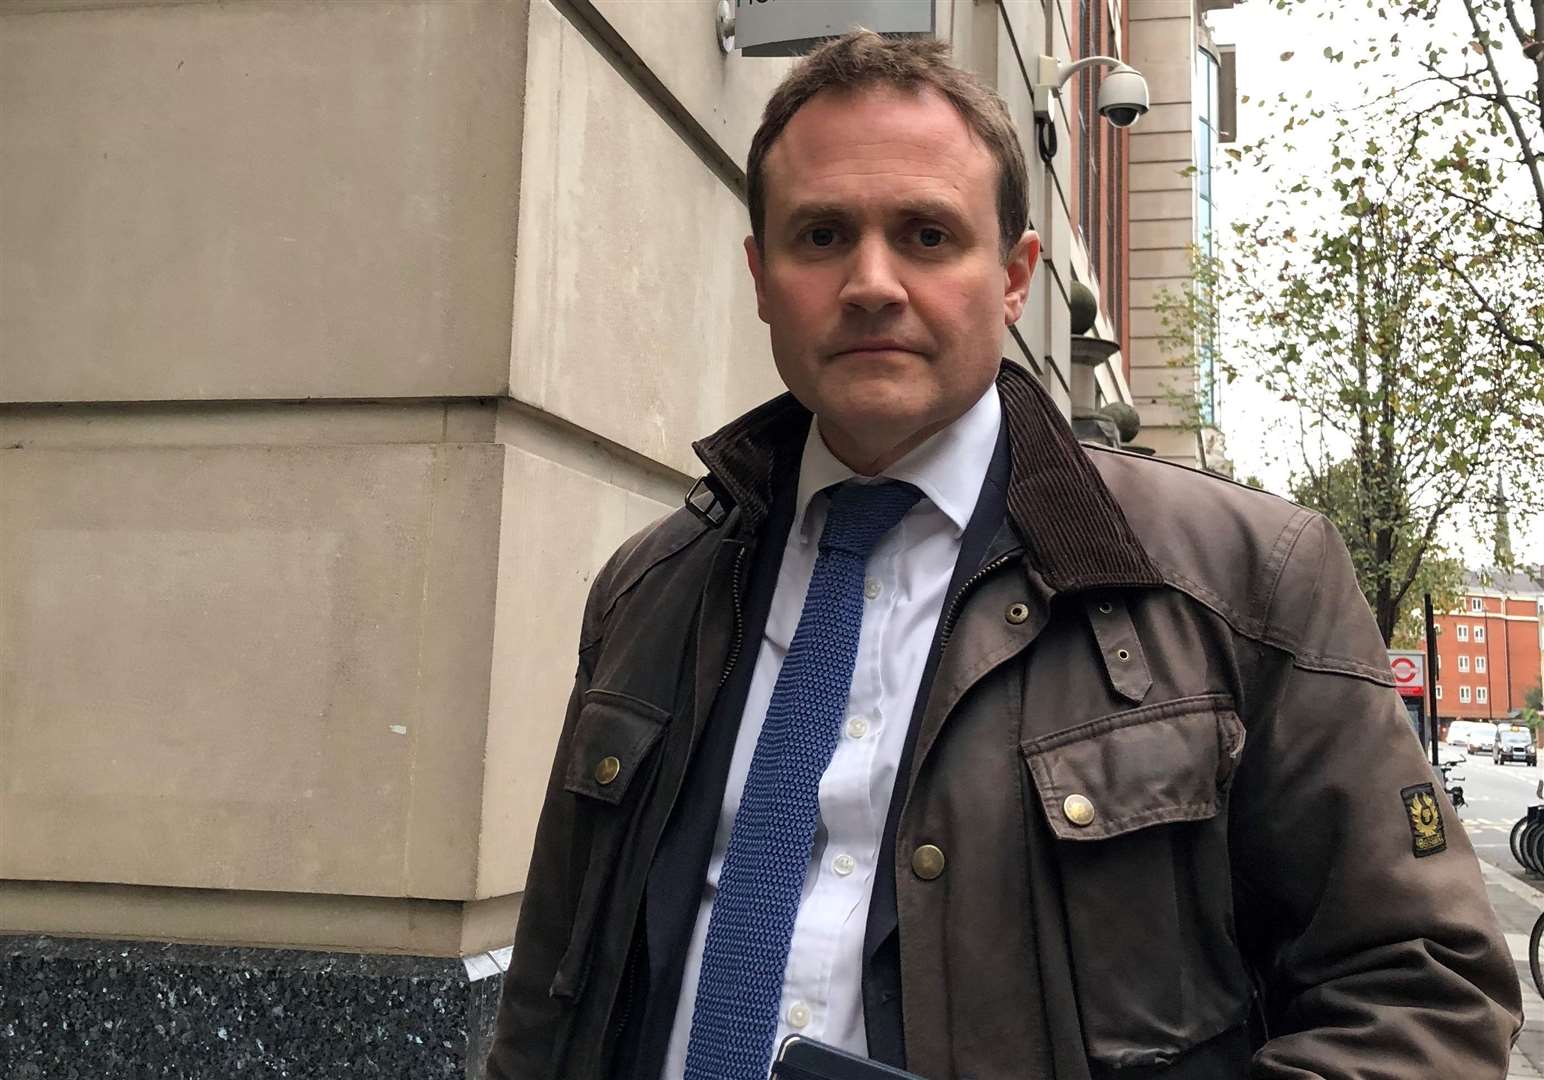 Tom Tugendhat, Conservative MP for Tonbridge and Malling